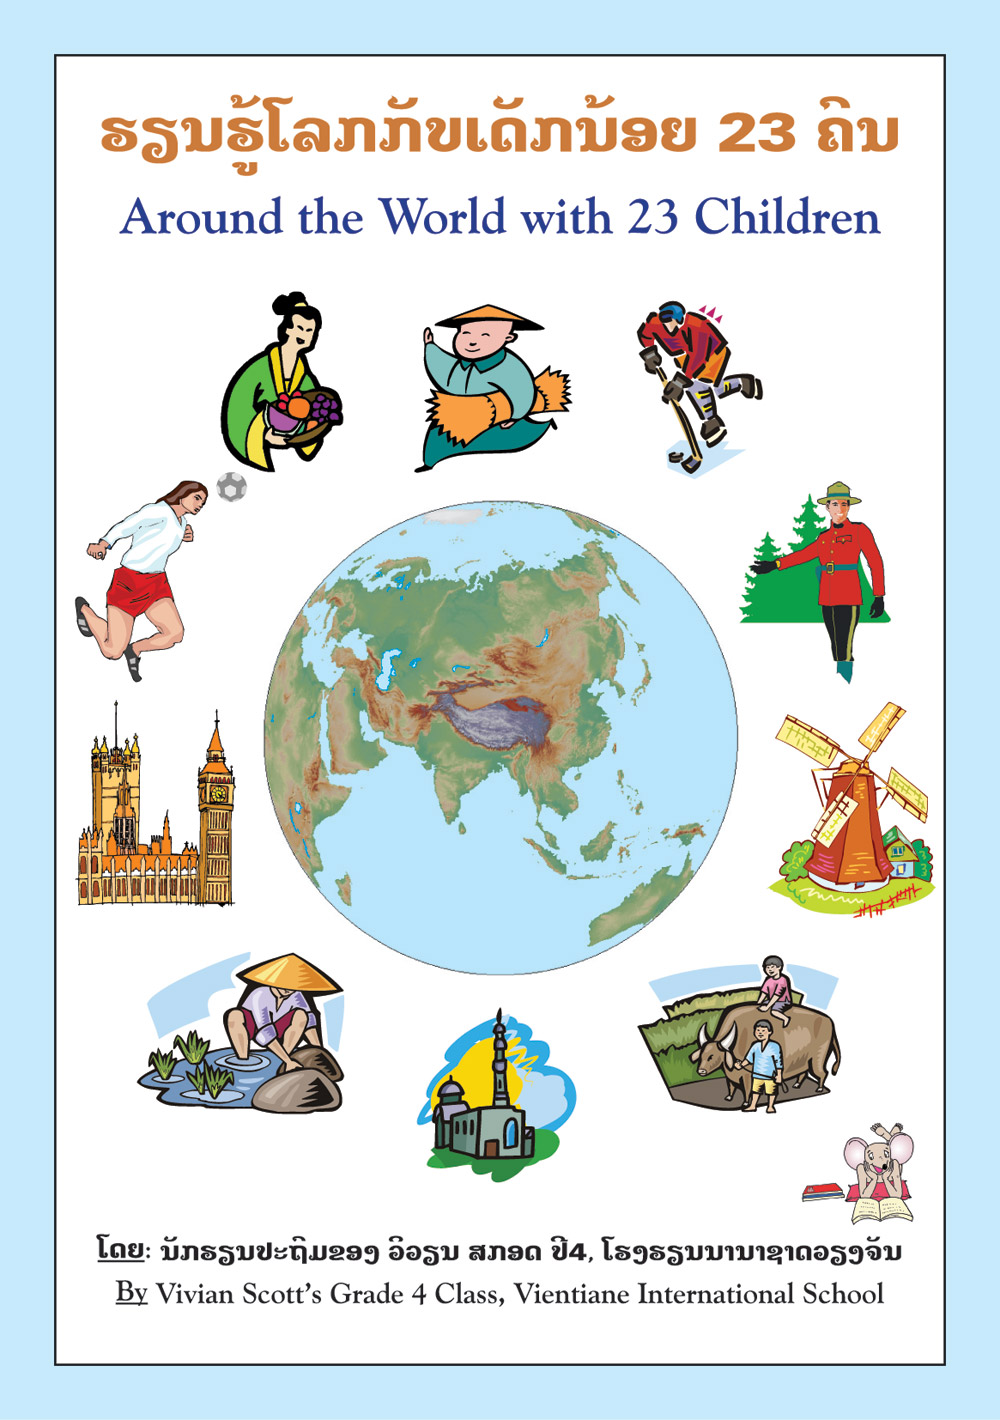 Around the World with 23 Children large book cover, published in Lao language